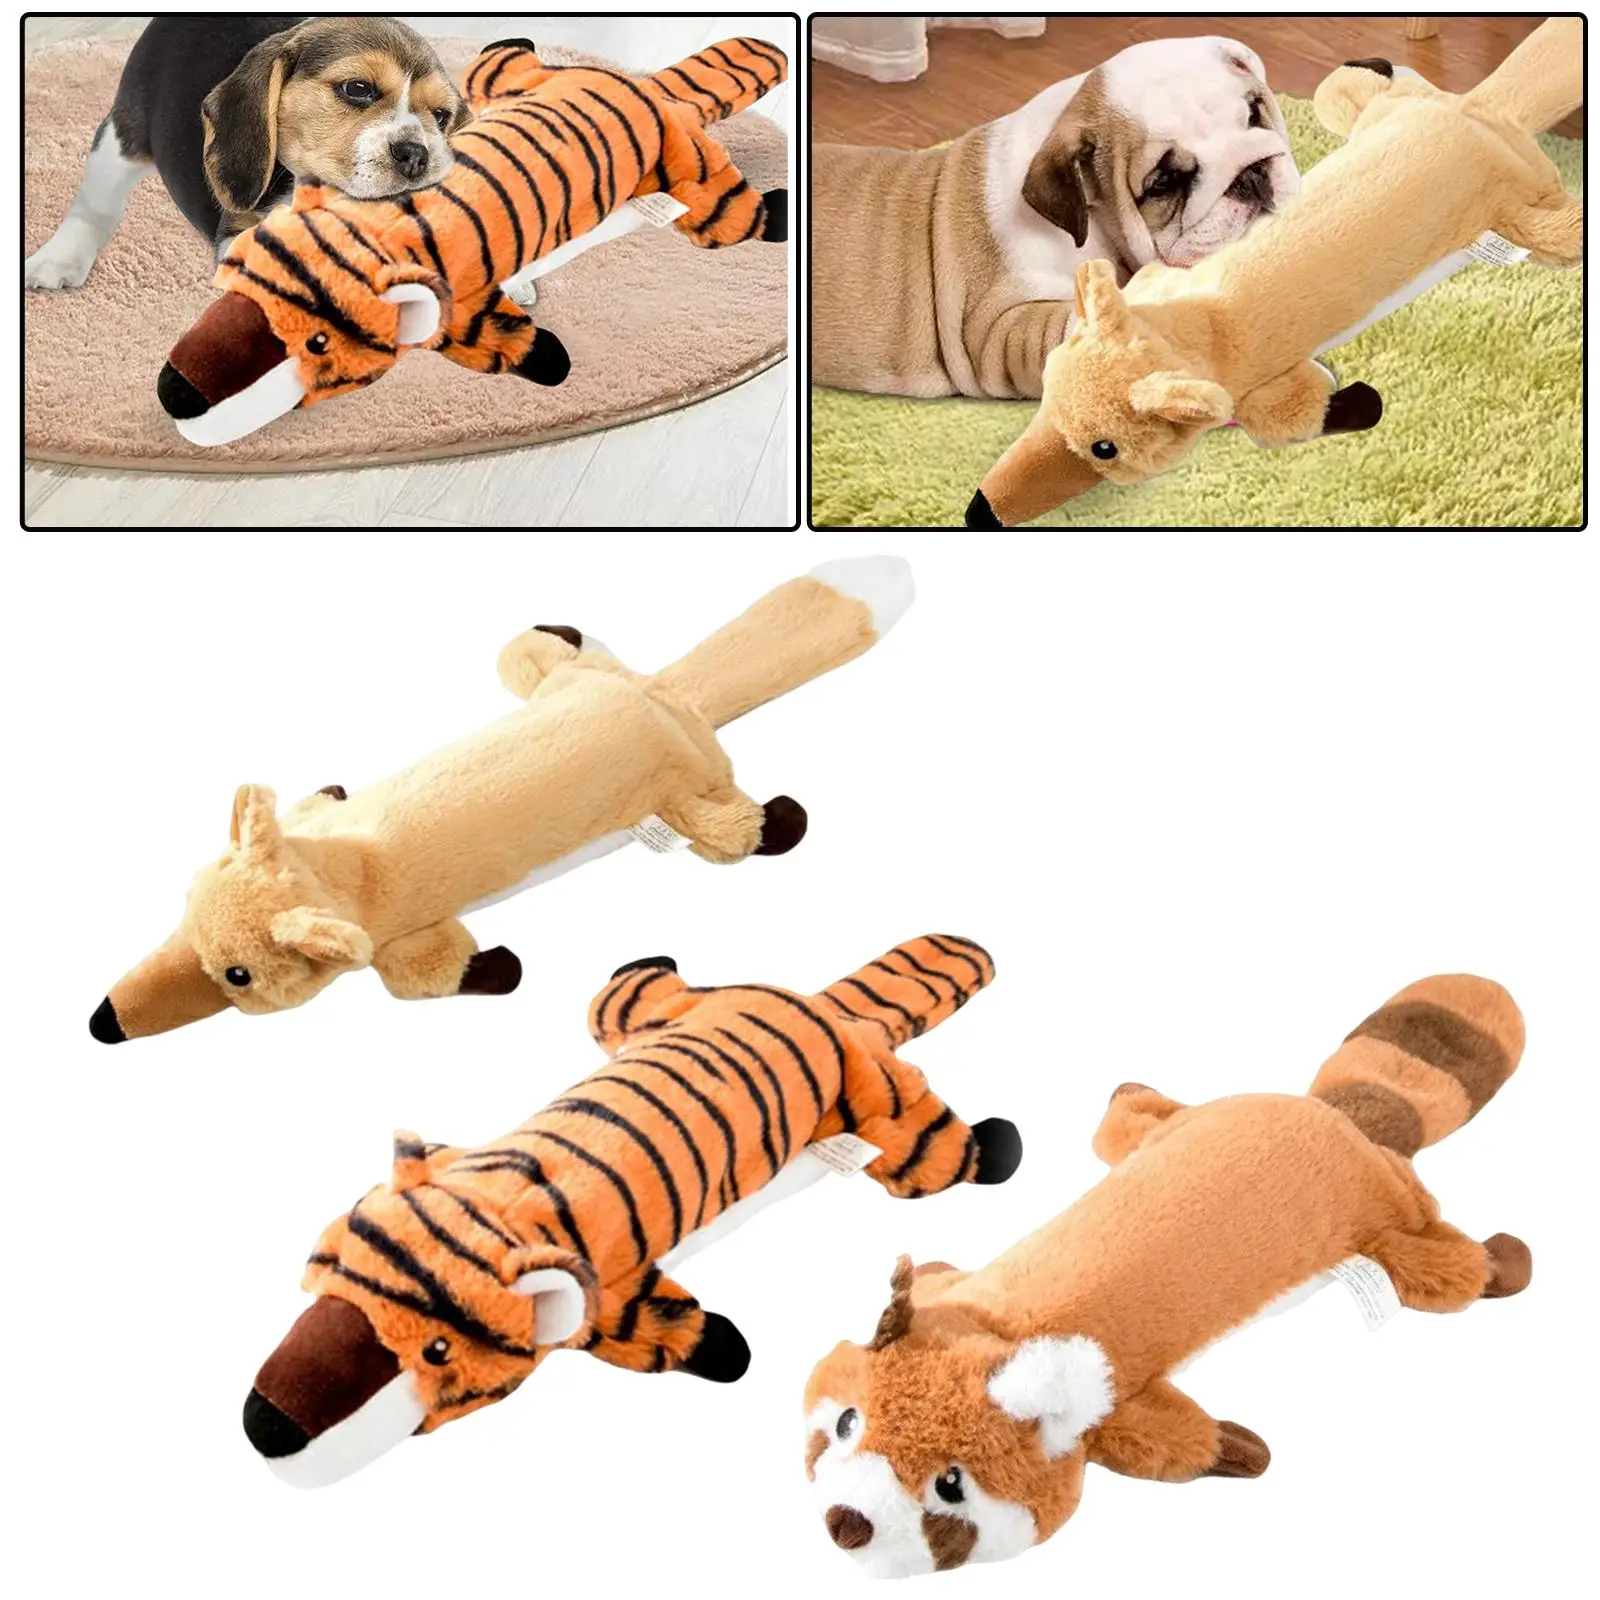 No Stuffing Squeaky Dog Toys Animals Crinkle Dog Toys Pet Training and Entertaining Puppy Toys for Large Small Medium Puppy Dogs